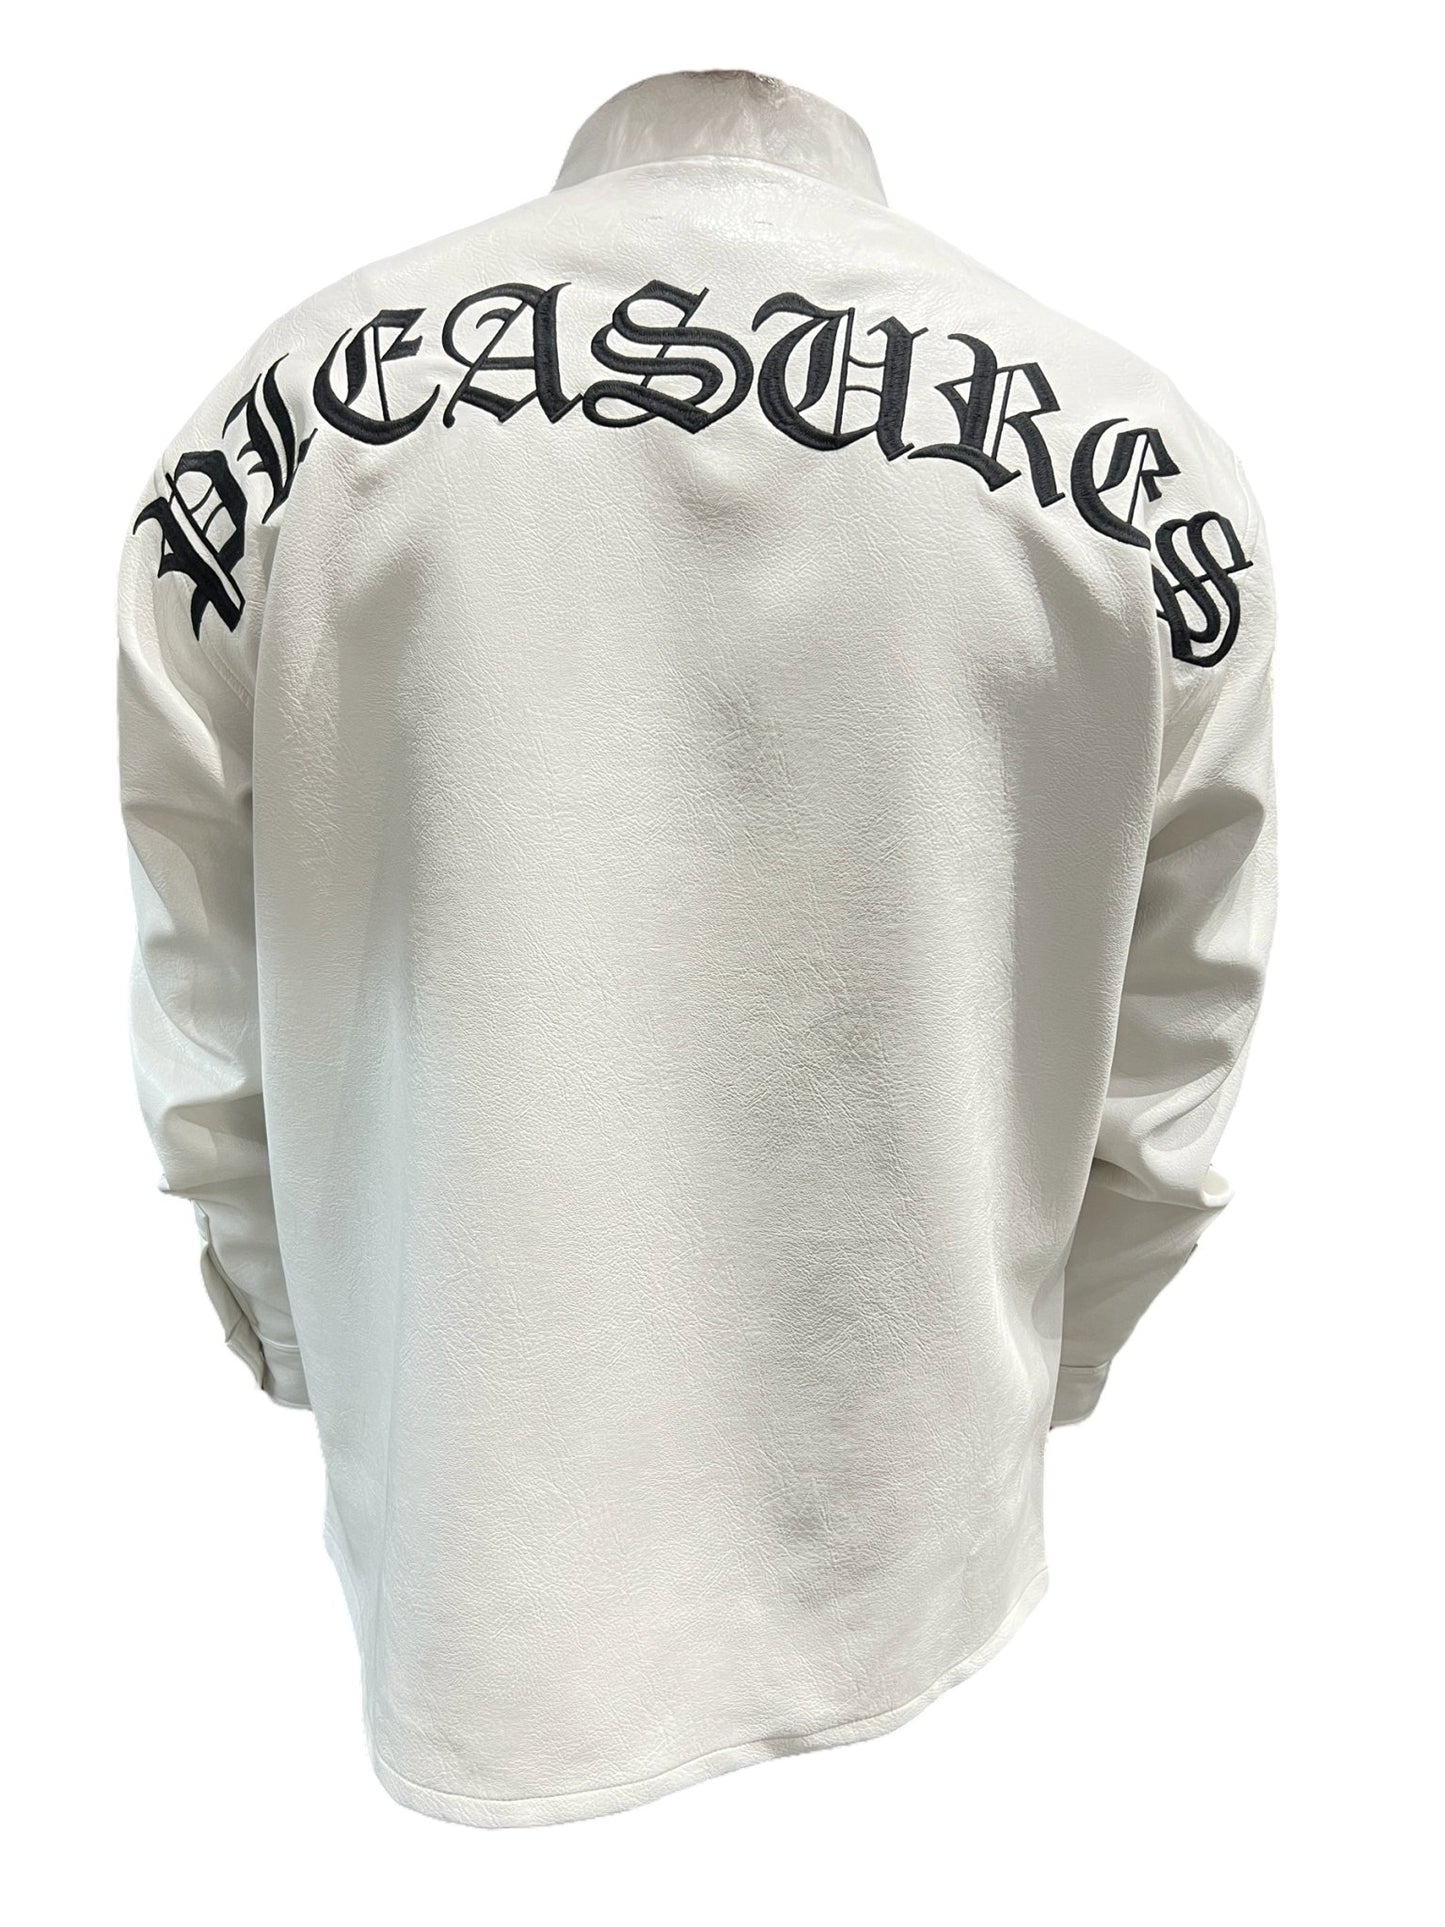 The back of a PLEASURES white overshirt with the word "treasures" embroidered on it.